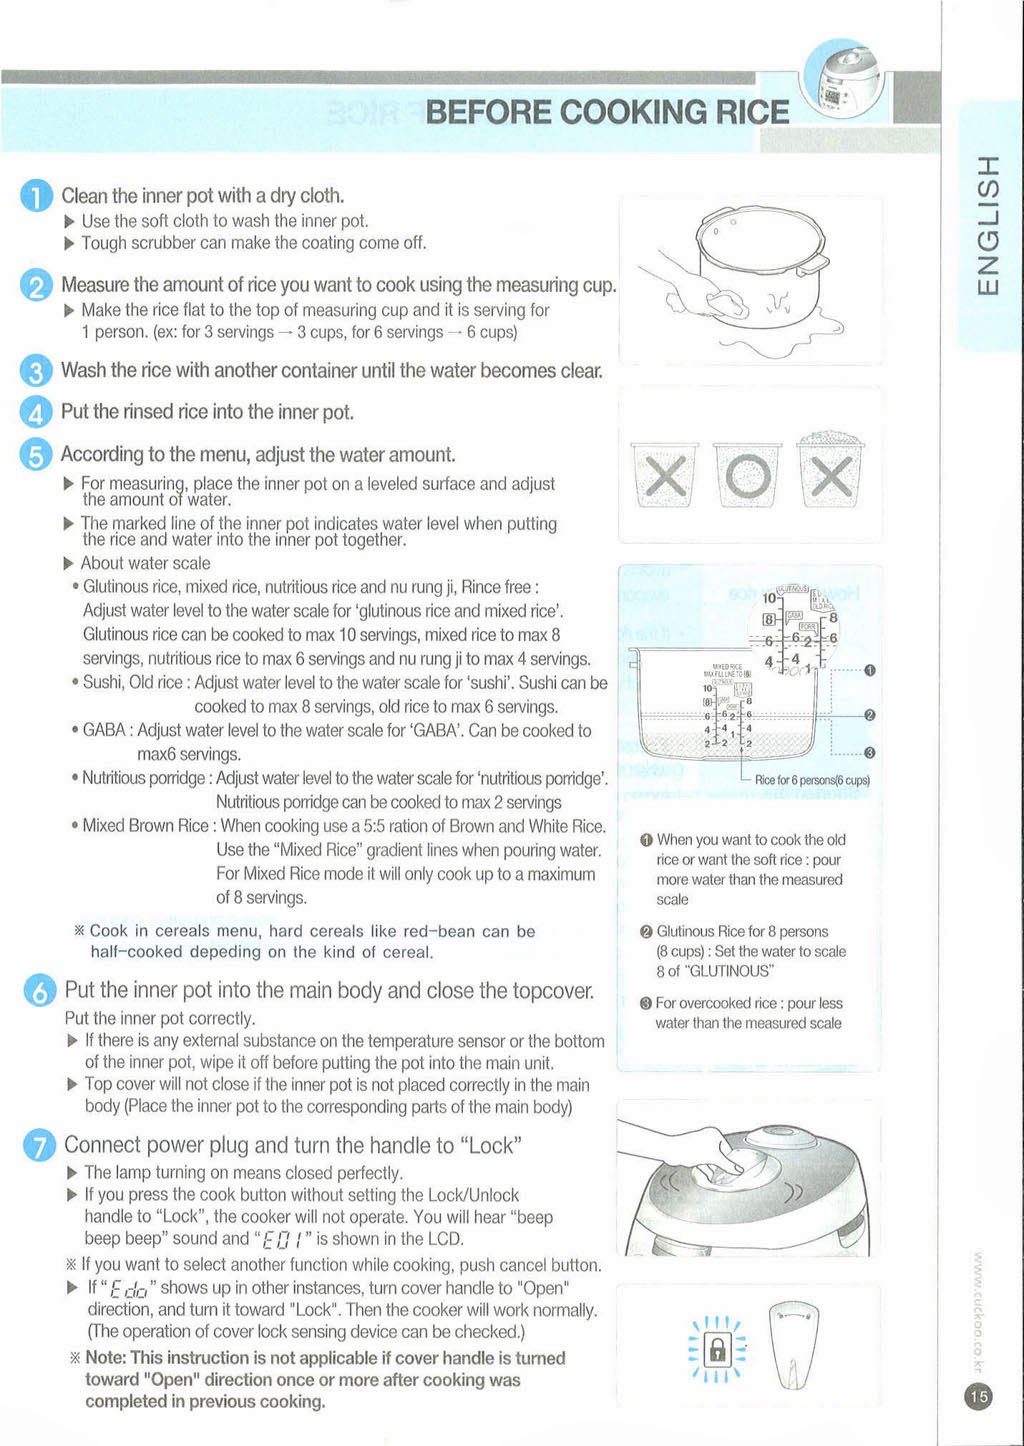 My Cuckoo Rice Cooker: Scanned Cuckoo Rice Cooker English Manual